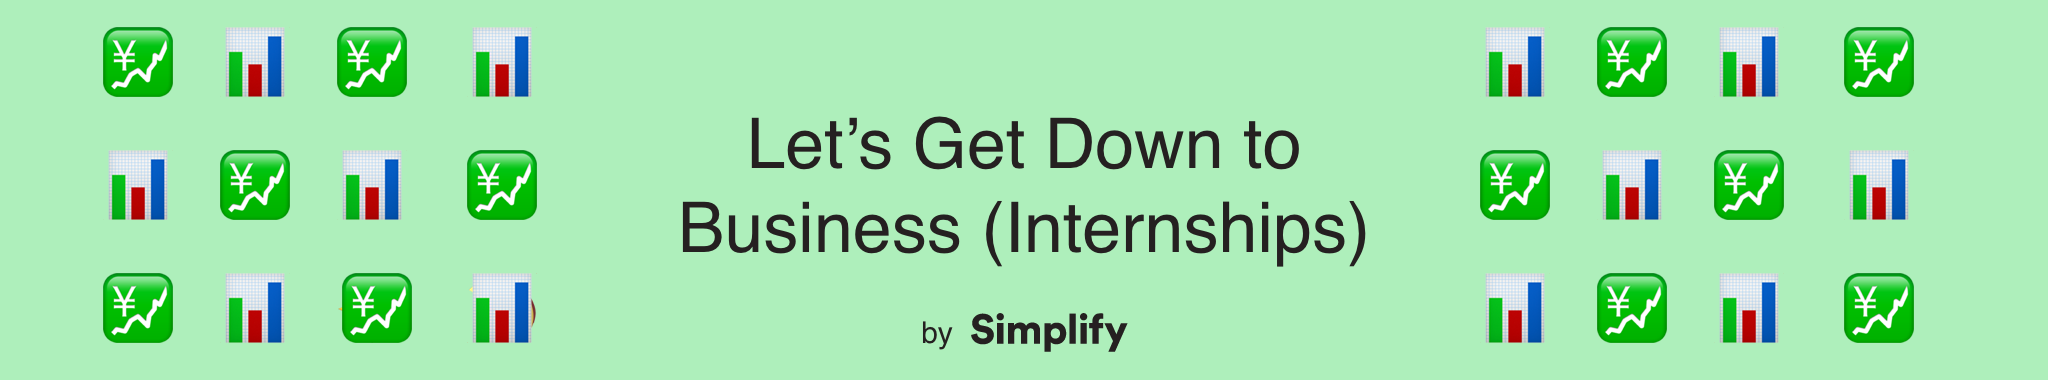 text that says “Let’s get down to business (internships) by Simplify” surrounded by chart and graph emojis